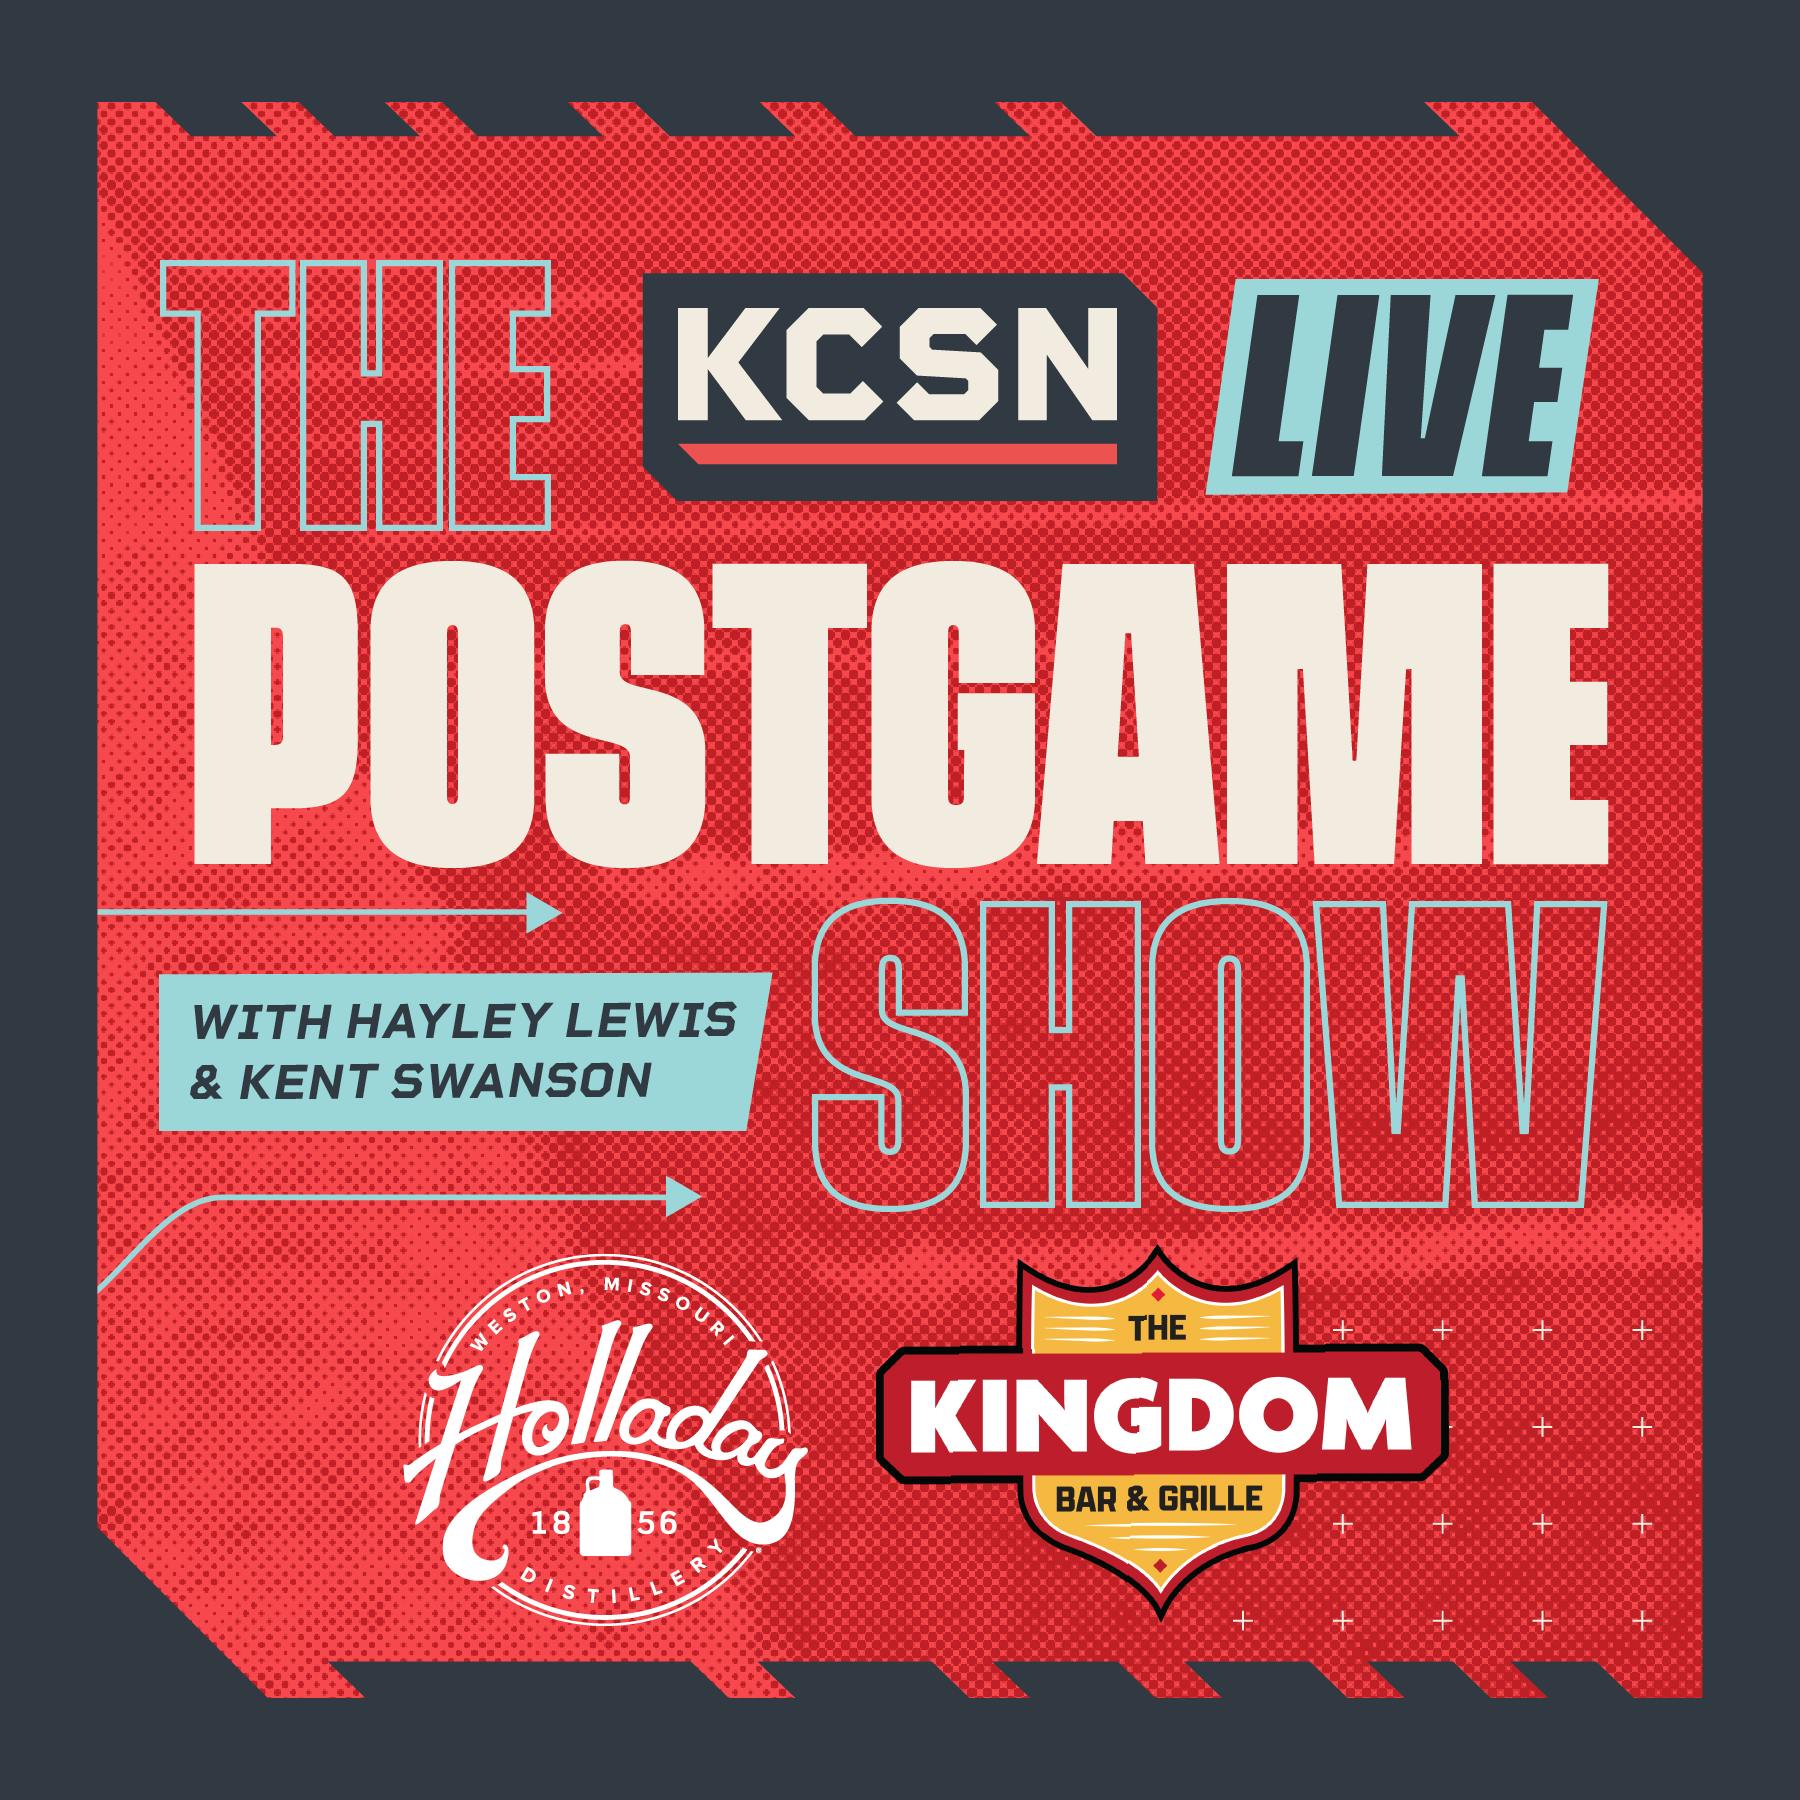 KCSN Live Postgame Show 9/17: Chiefs Claim 17-9 Hard-Fought Win Over Jaguars